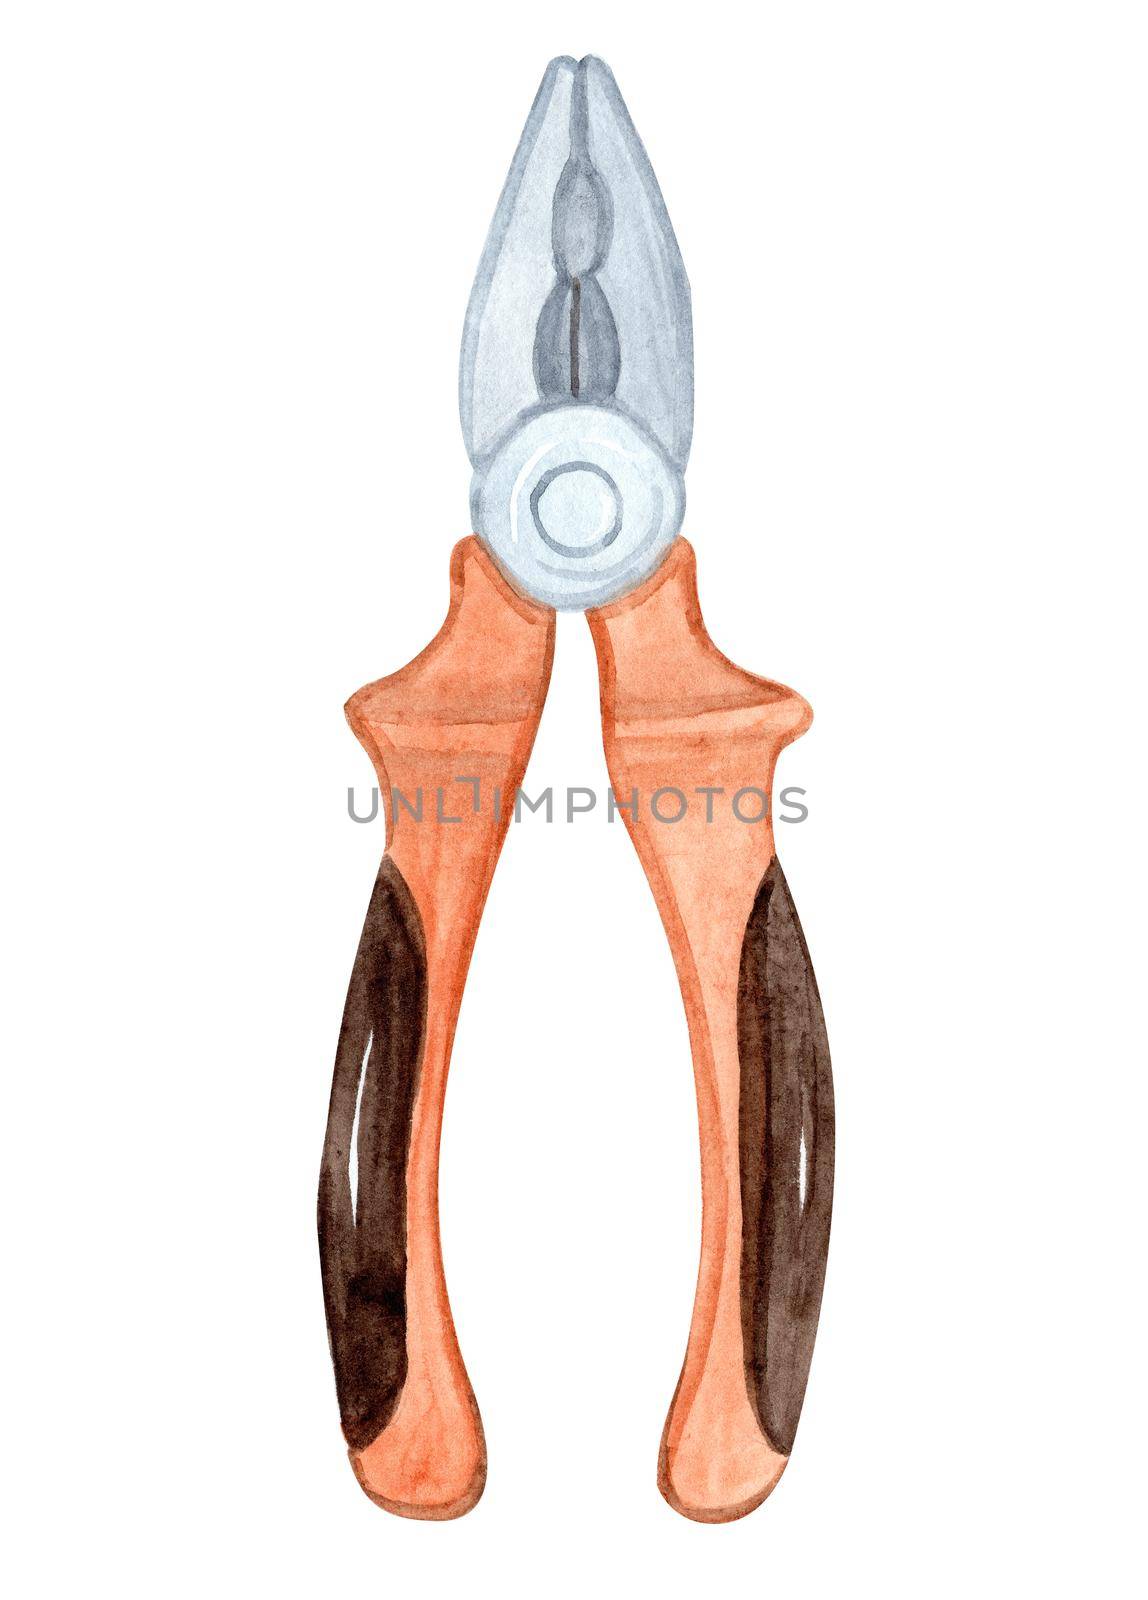 watercolor orange pliers tool isolated on white background